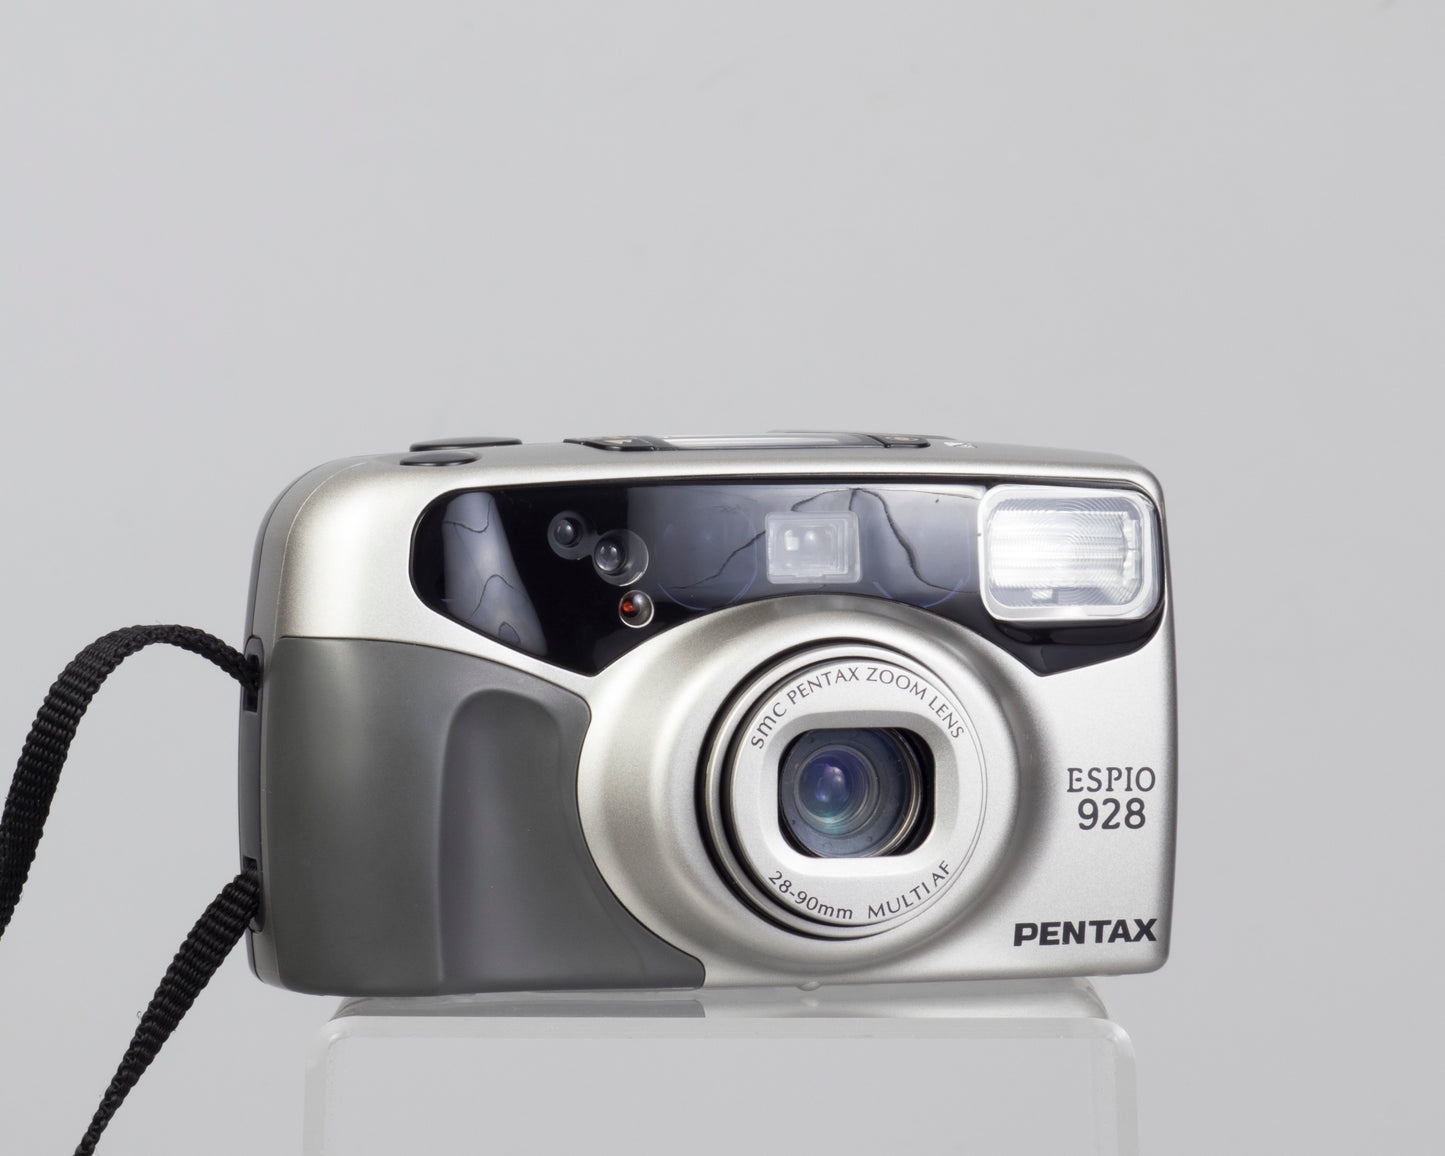 The Pentax Espio 928 is a very advanced 35mm point-and-shoot camera from the 1990s.